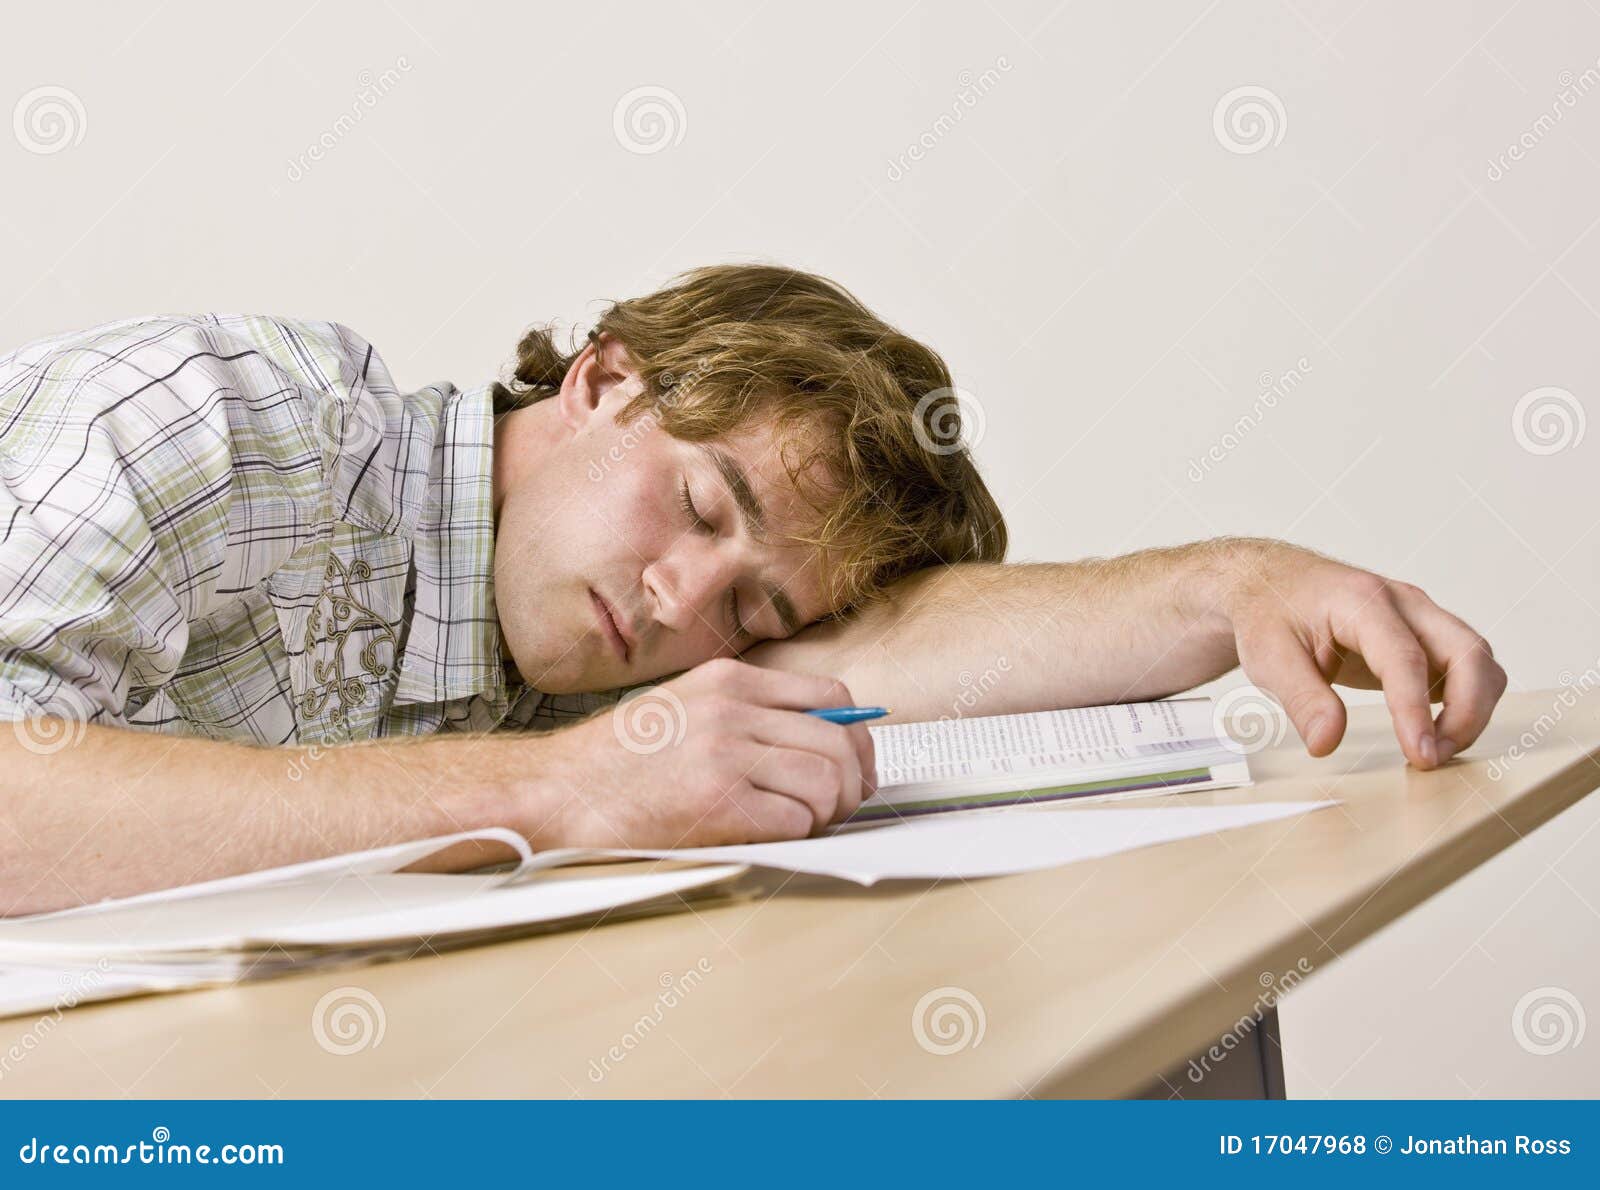 Student Sleeping At Desk In Classroom Stock Photo Image Of Desk